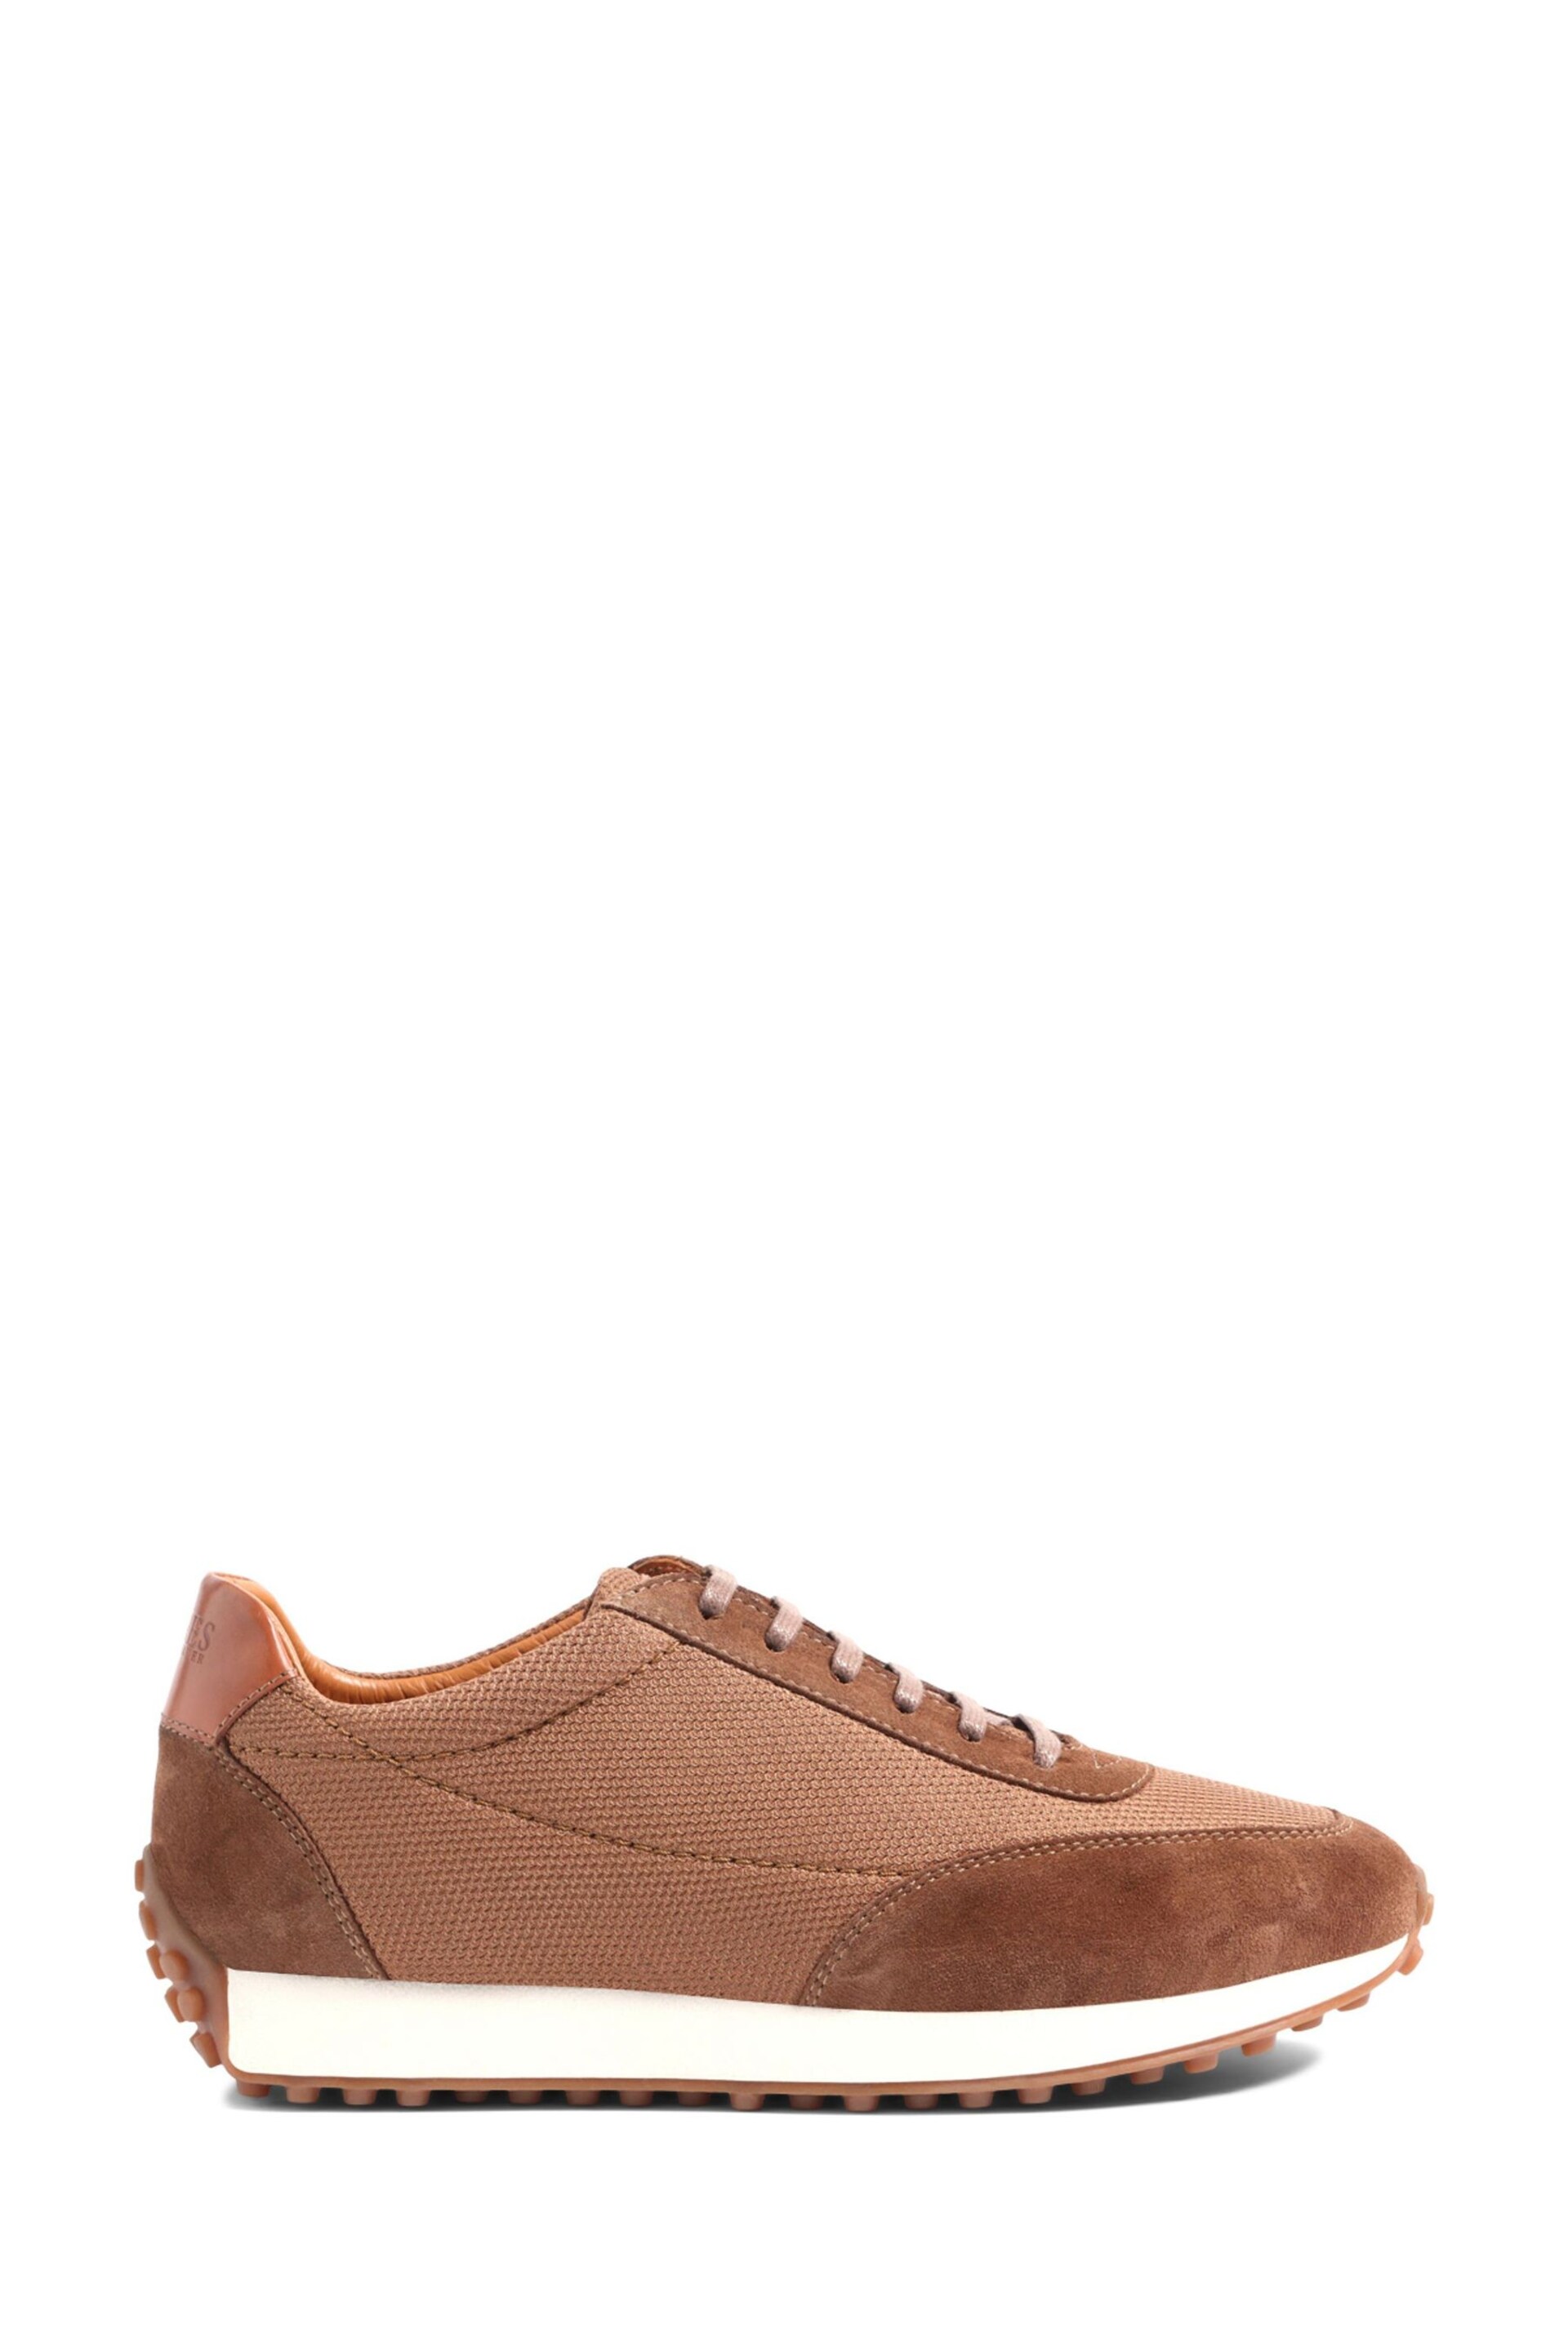 Jones Bootmaker Southend Smart Leather Trainers - Image 1 of 4